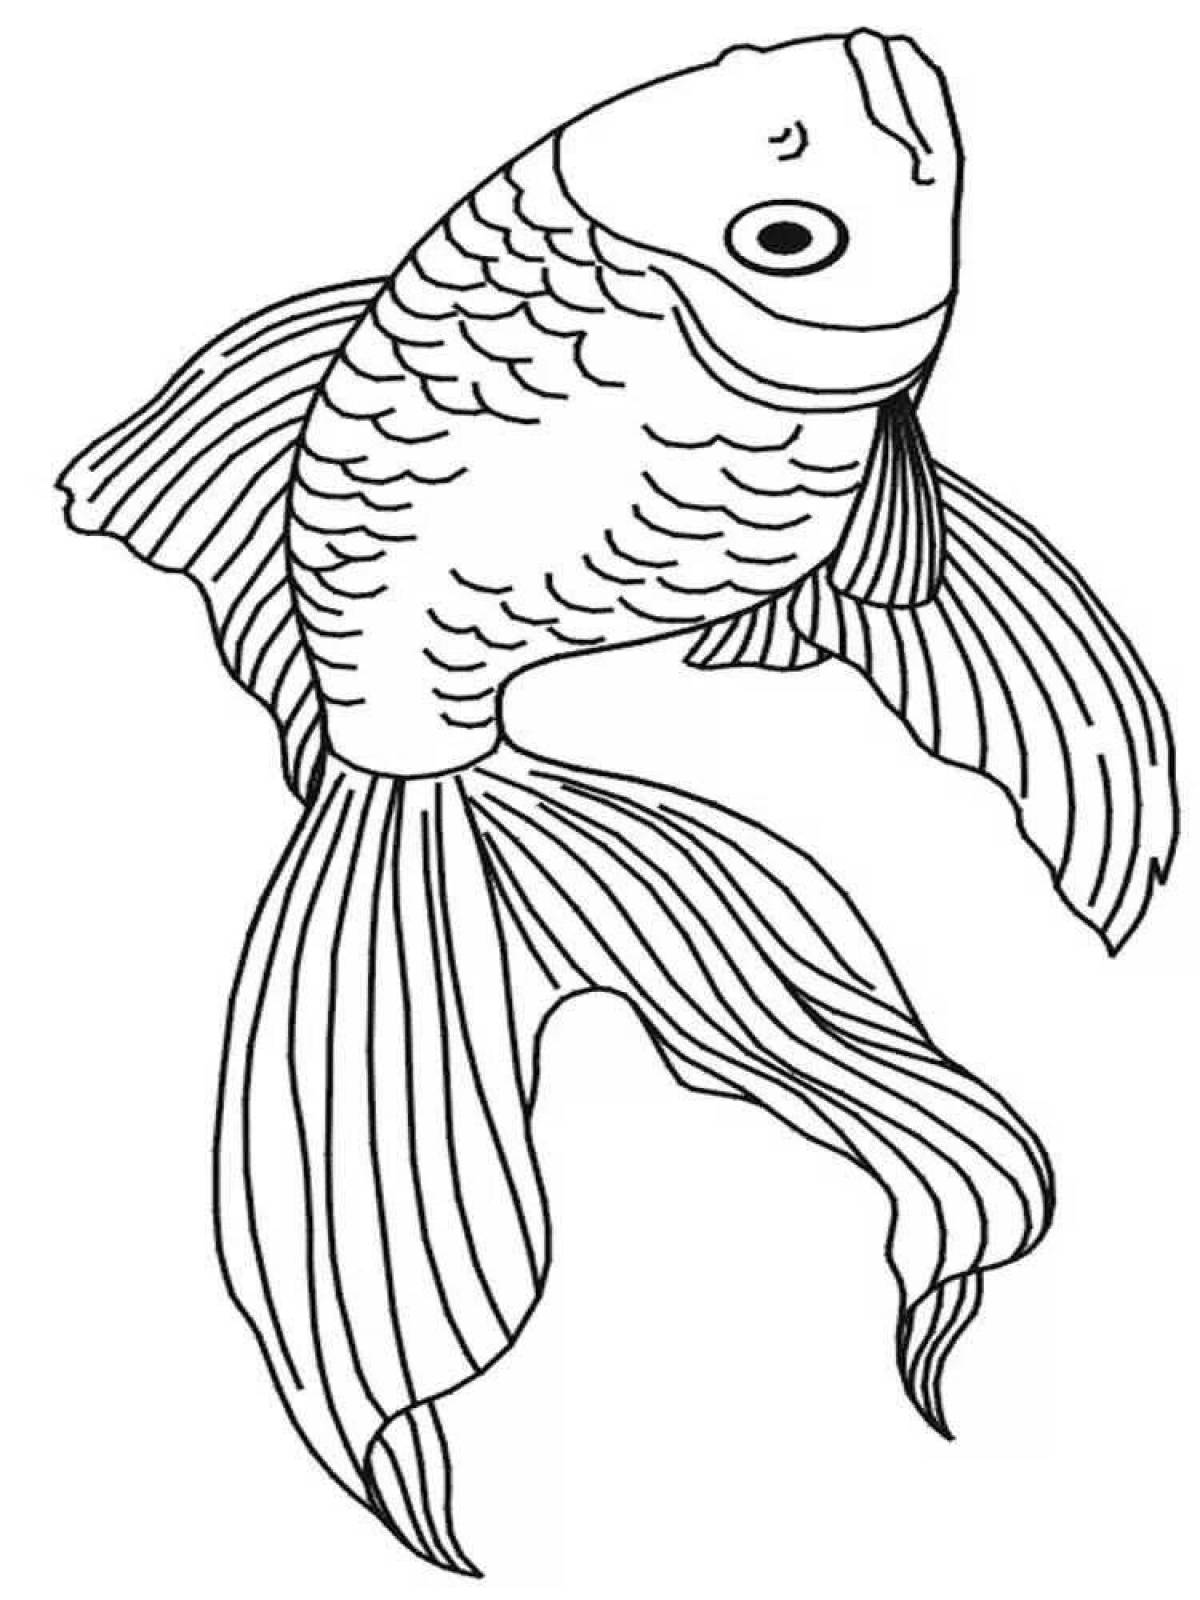 Coloring pages with goldfish for kids